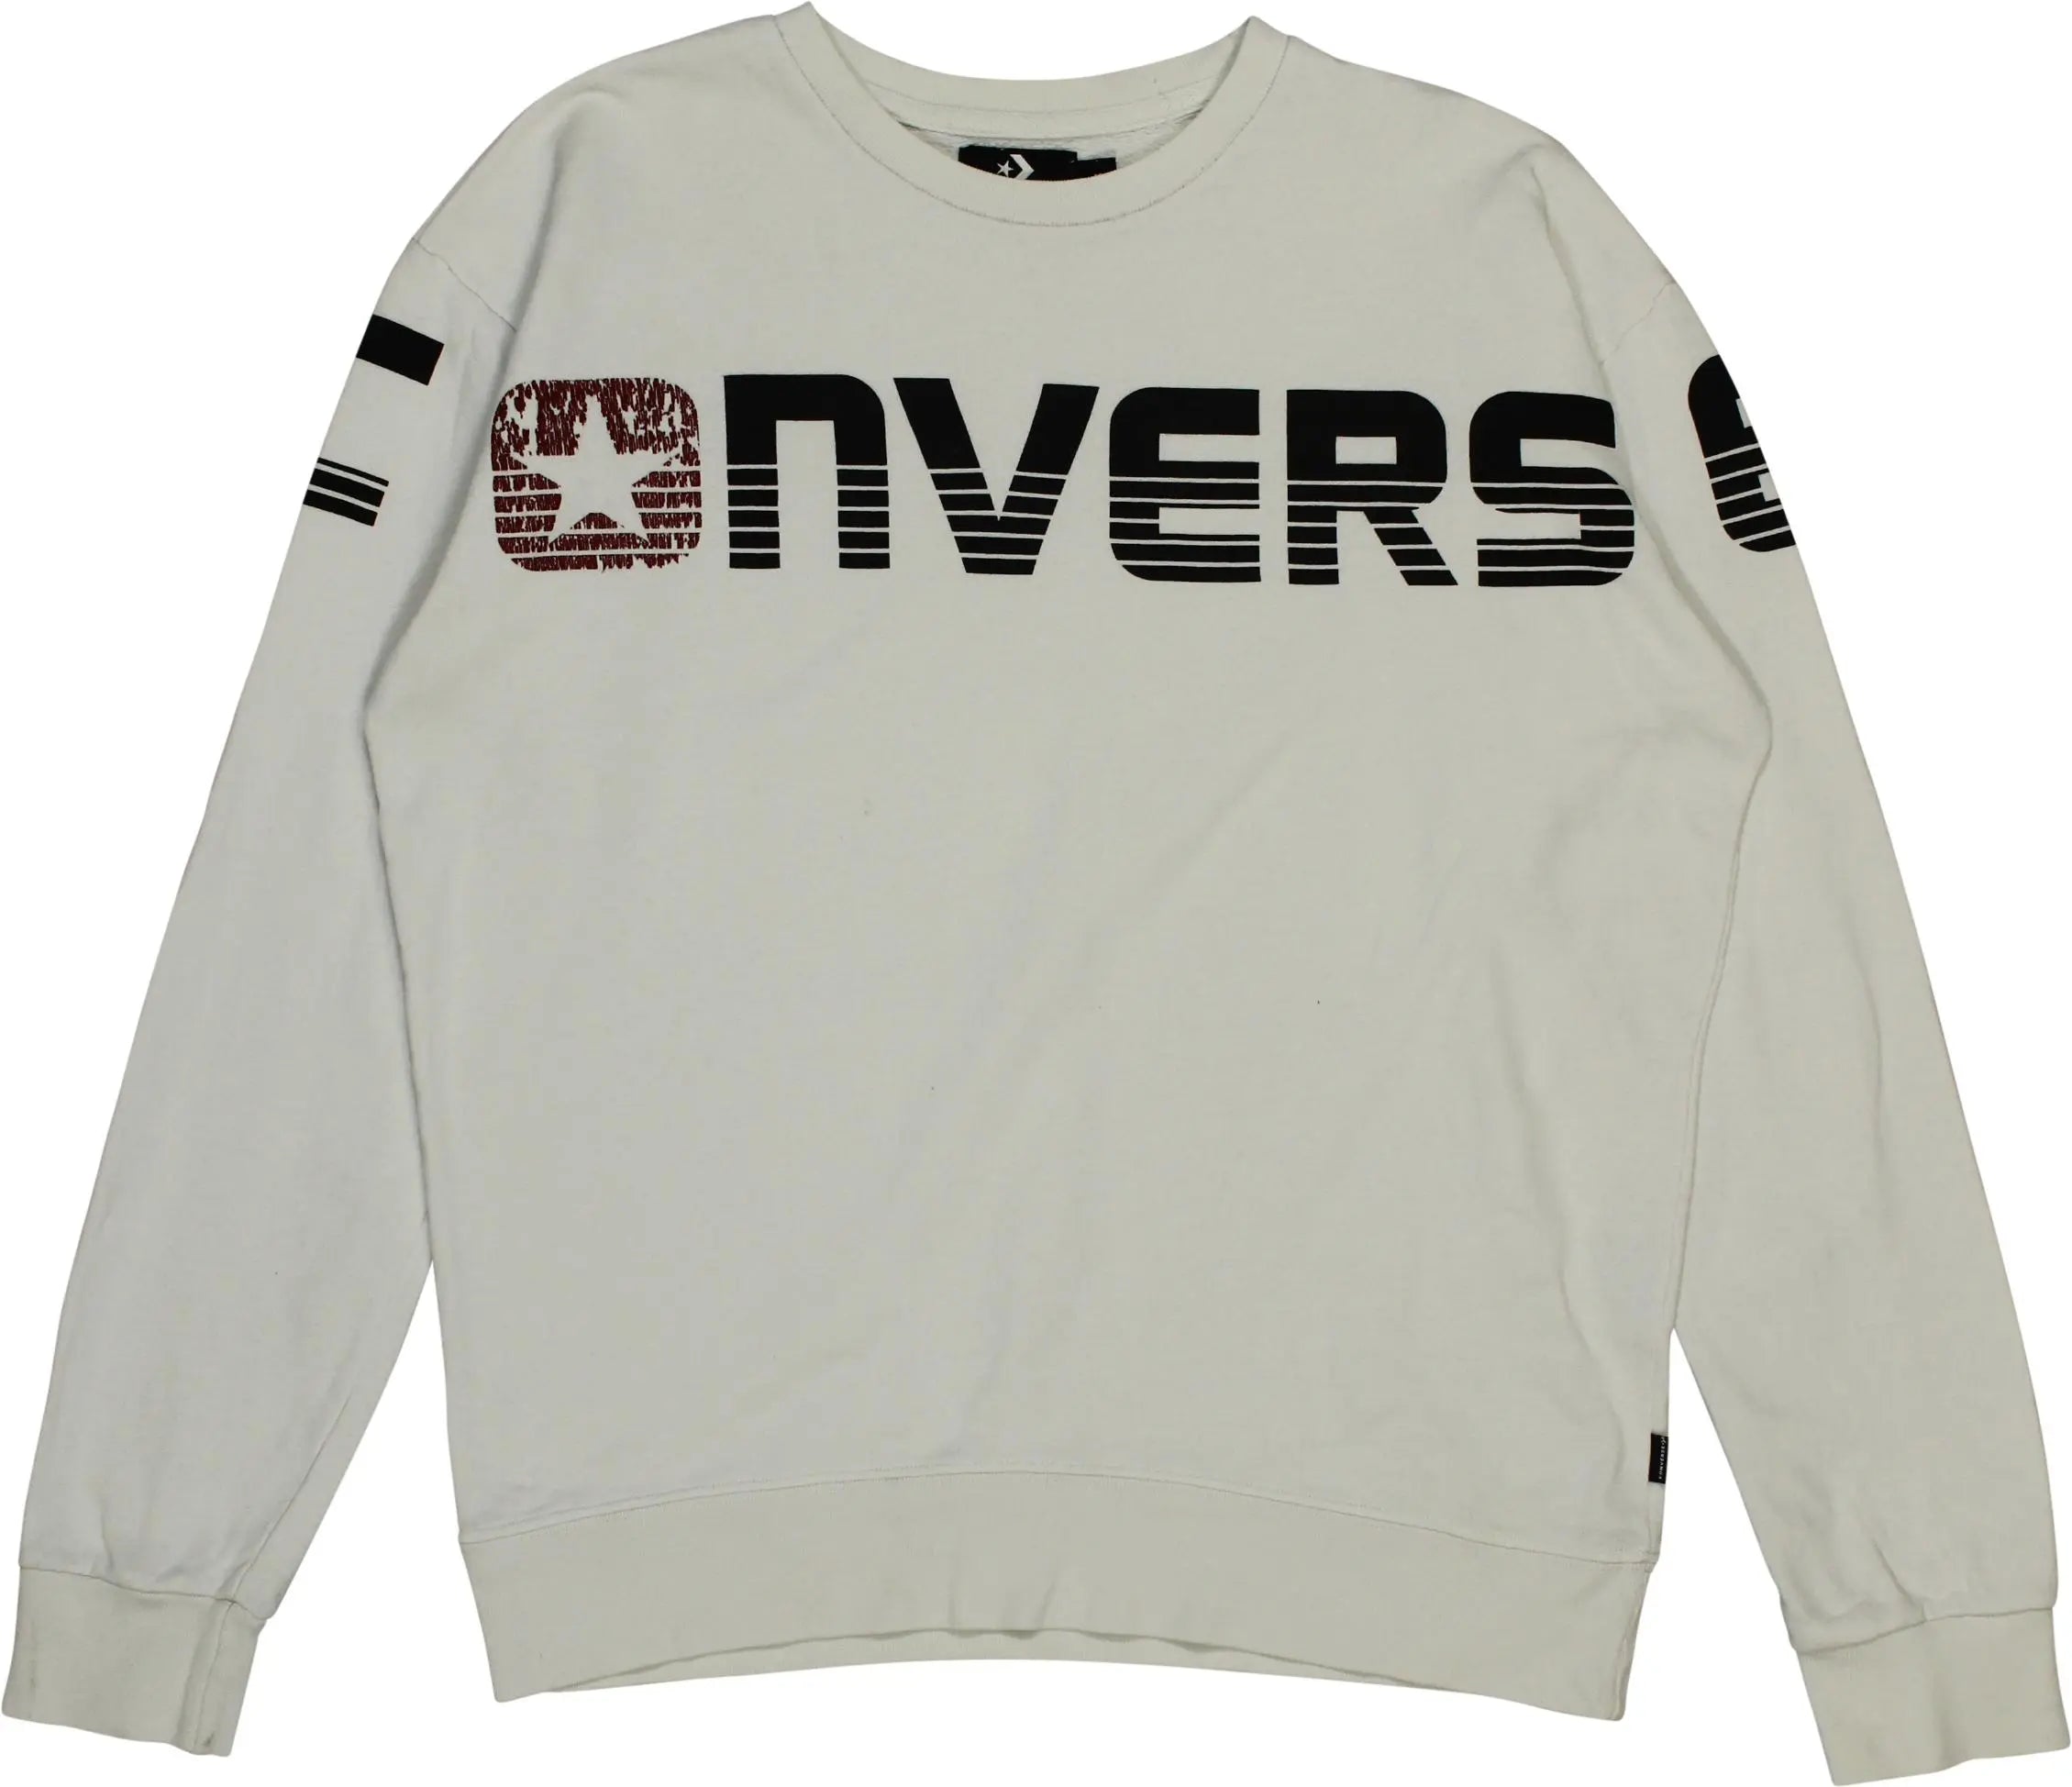 Converse - White Sweatshirt by Converse- ThriftTale.com - Vintage and second handclothing